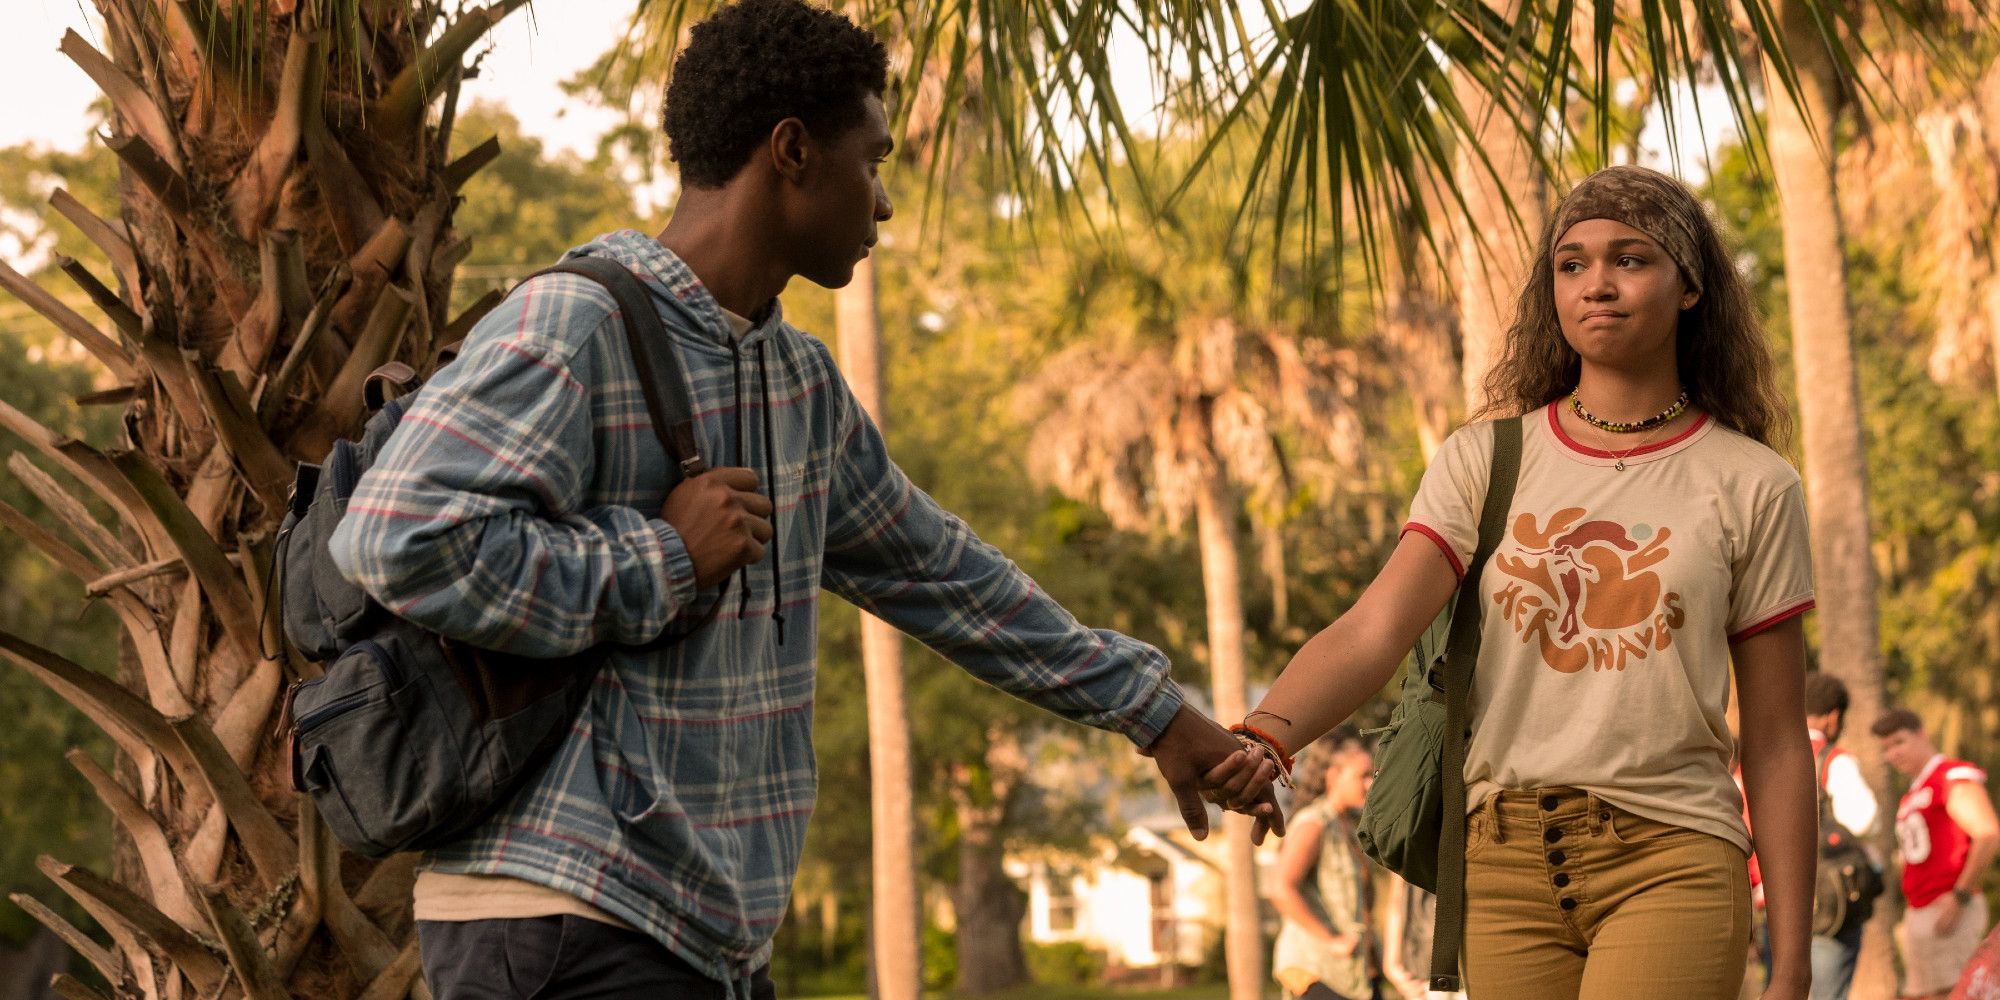 Outer Banks Season 2: Why Kiara & Pope Staying Just Friends Was The Right Choice